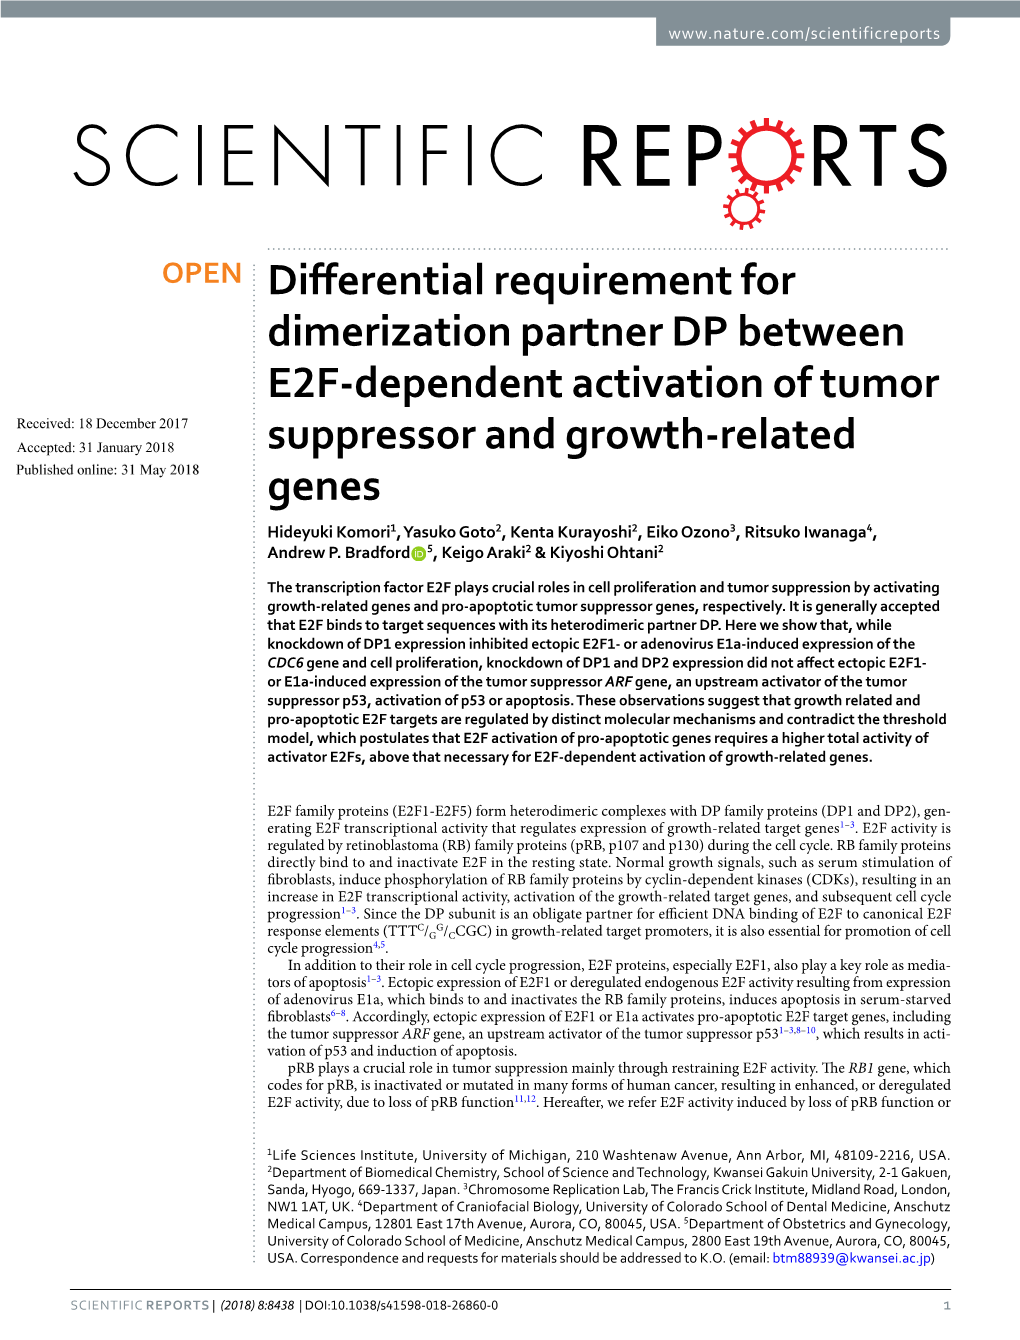 Differential Requirement for Dimerization Partner DP Between